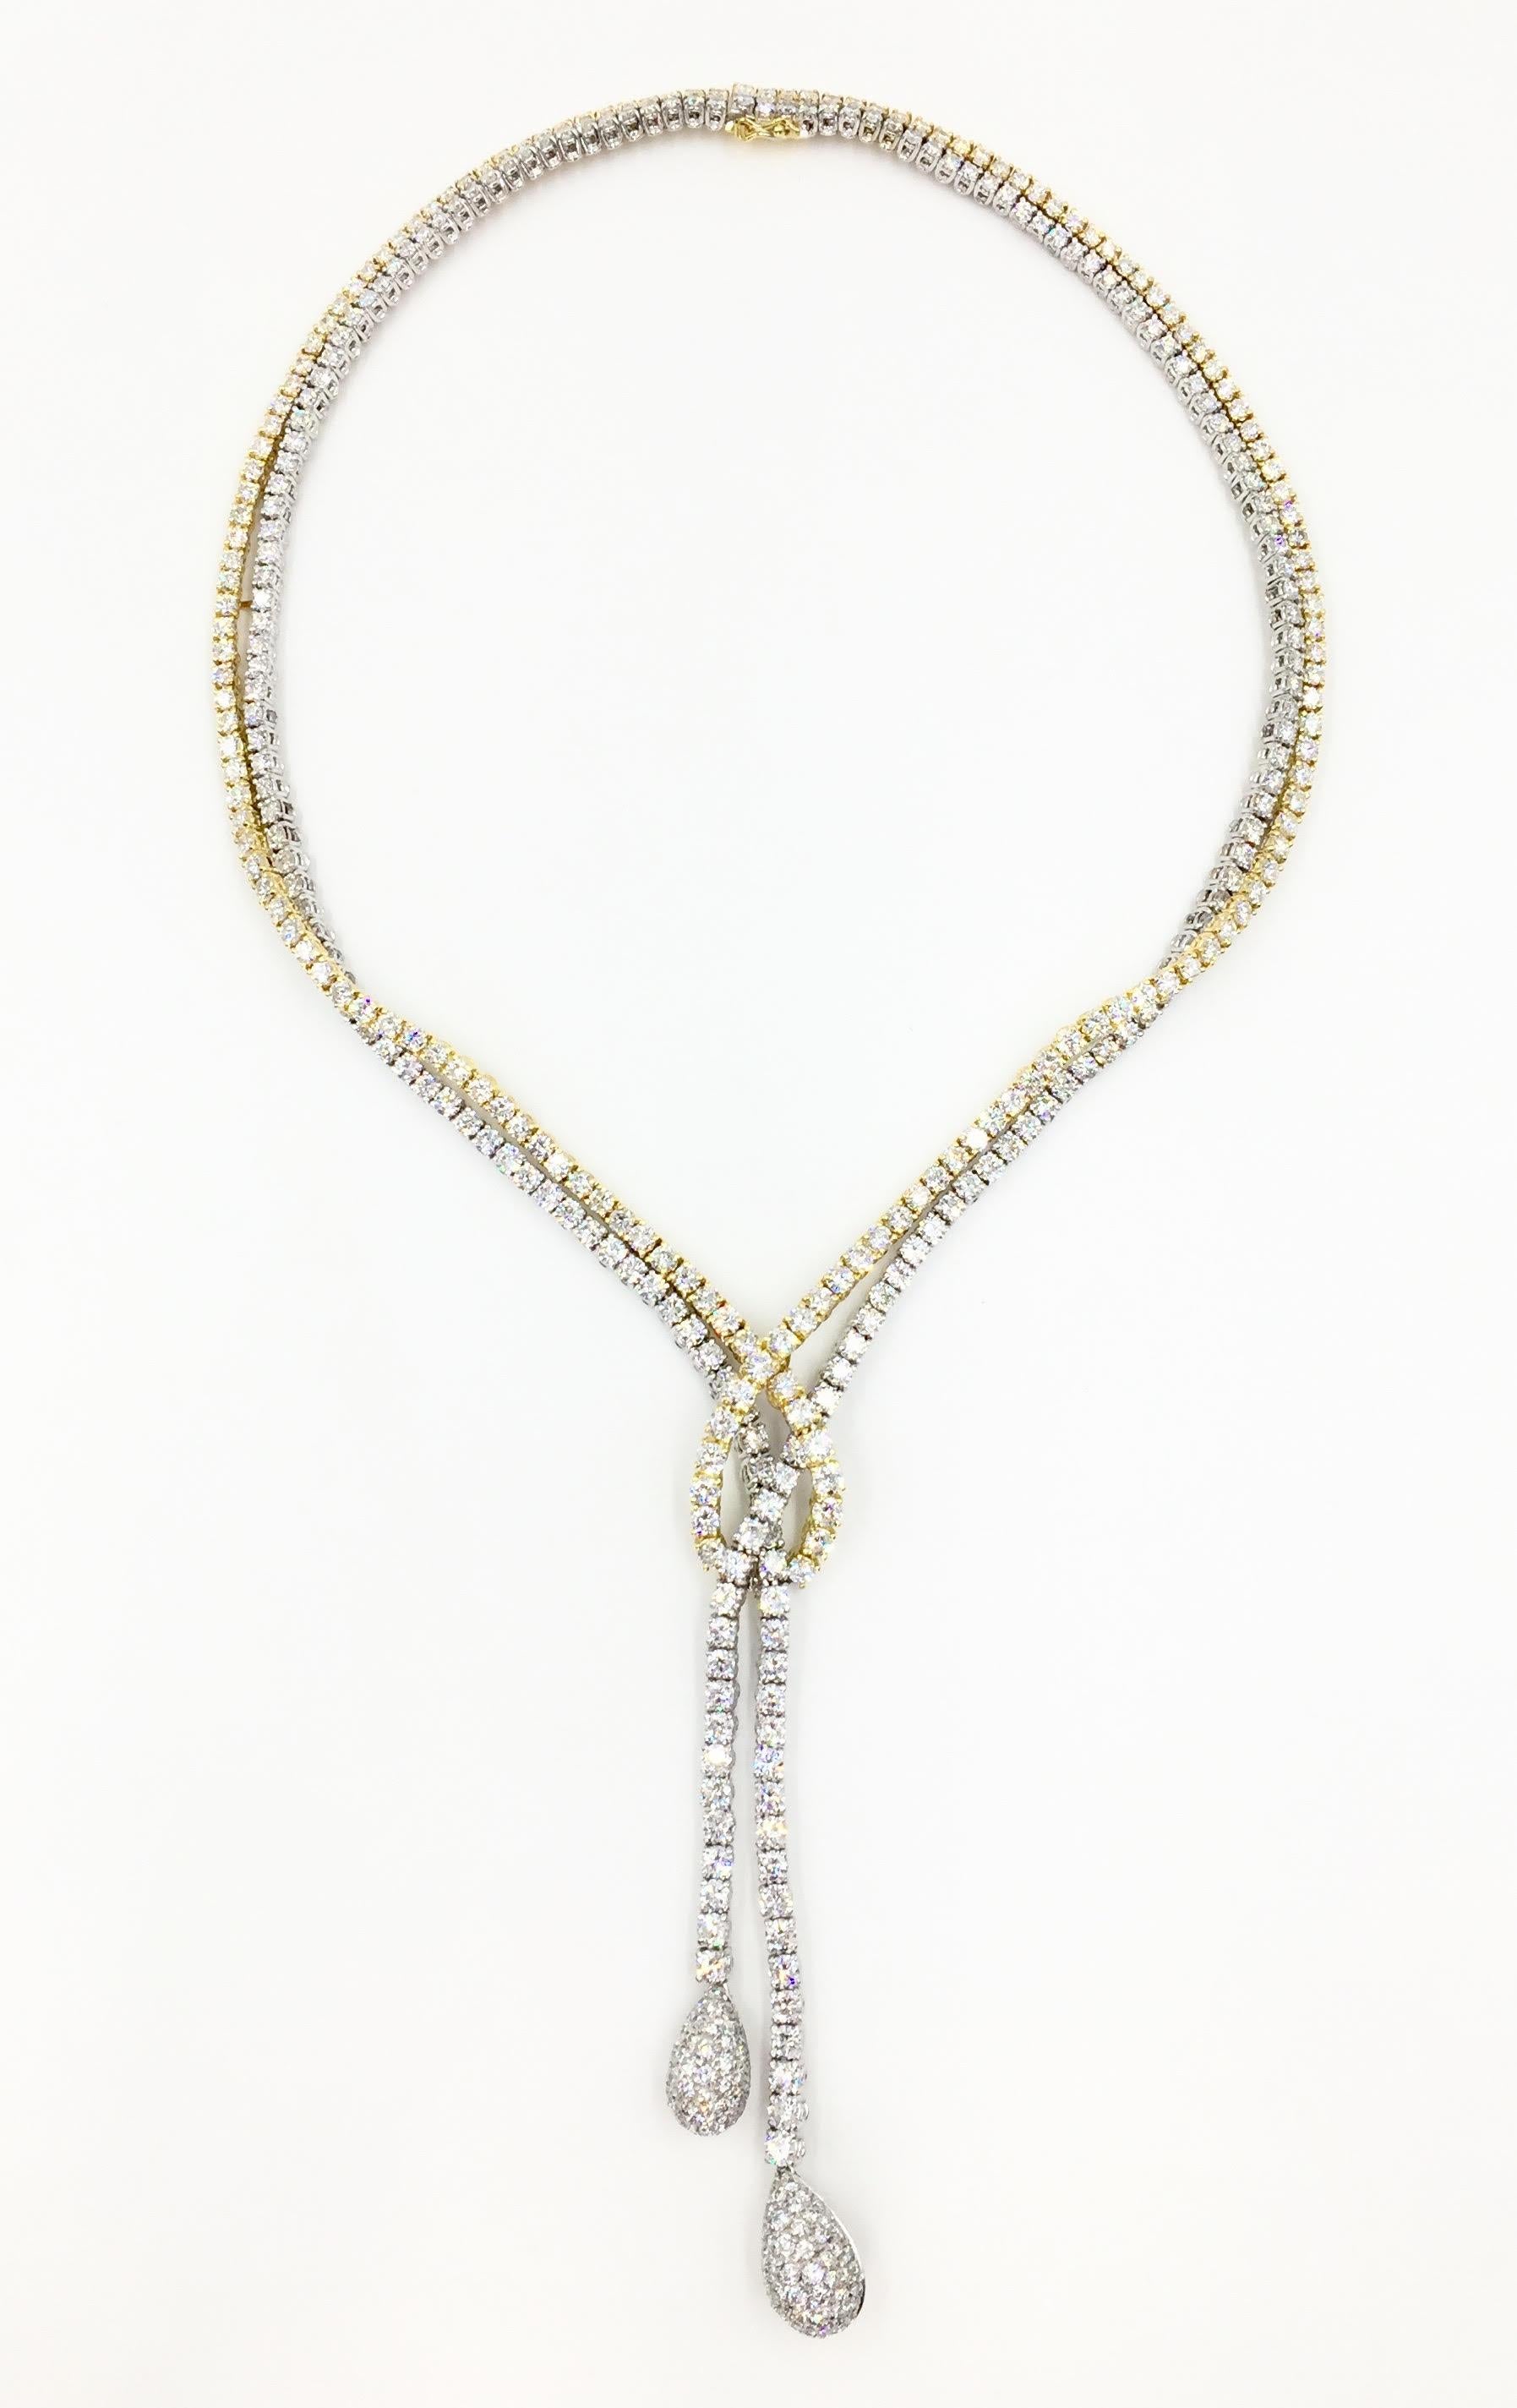 A stunning and sophisticated statement piece by renowned Italian designer, Stefan Hafner, is exquisitely set with a total of 21.52 carats of high quality round brilliant diamonds, approximately F color, VS clarity. A yellow gold strand is expertly